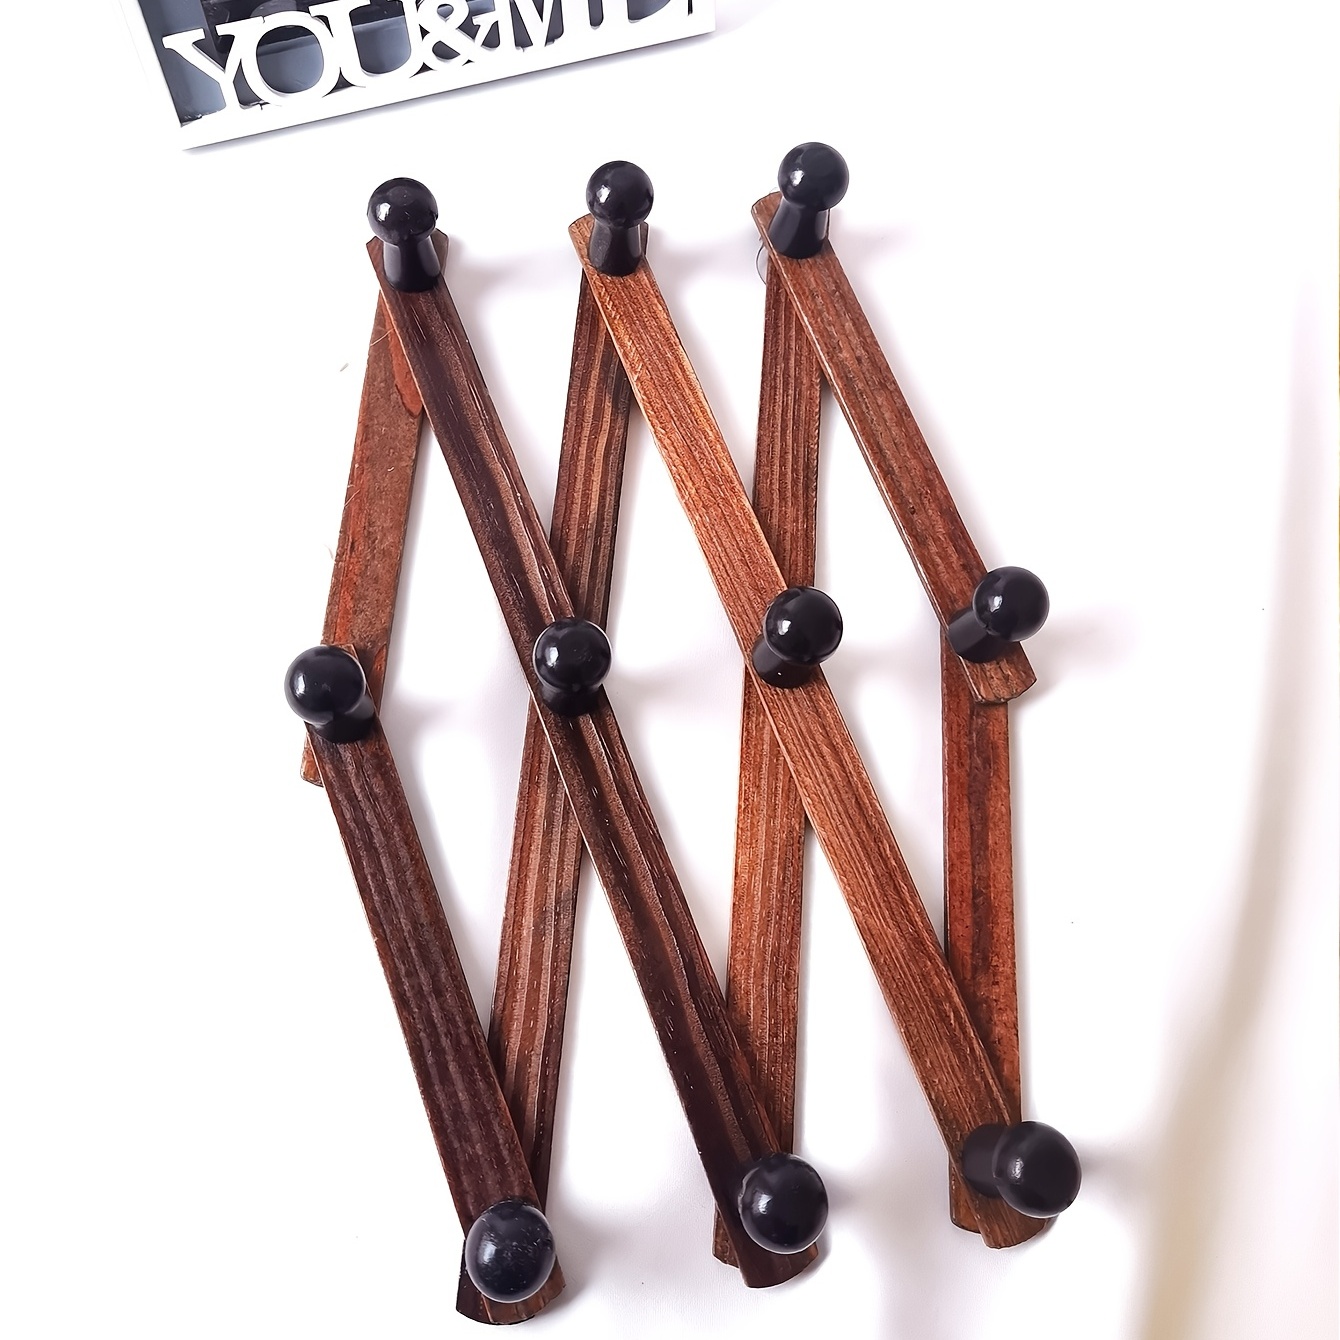 Wood Accordion Wall Hanger, Expandable Coat Rack Wall Mount with 14 Pegs,  Expanding Hat Rack for Wall, X Shape TG9150-P41 - The Home Depot